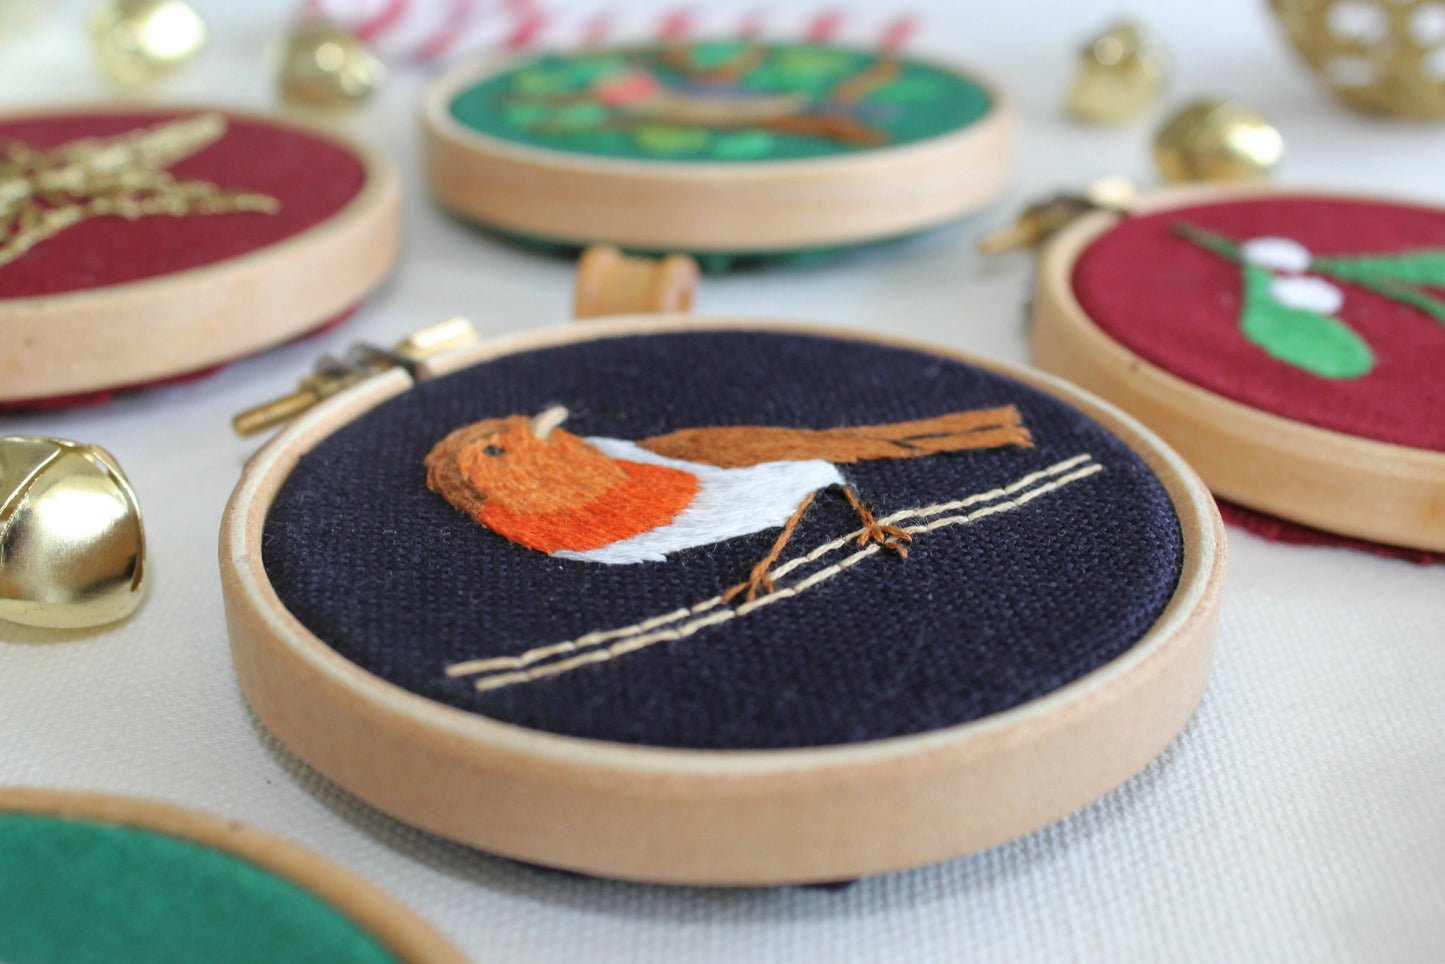 Robin Embroidery Kit